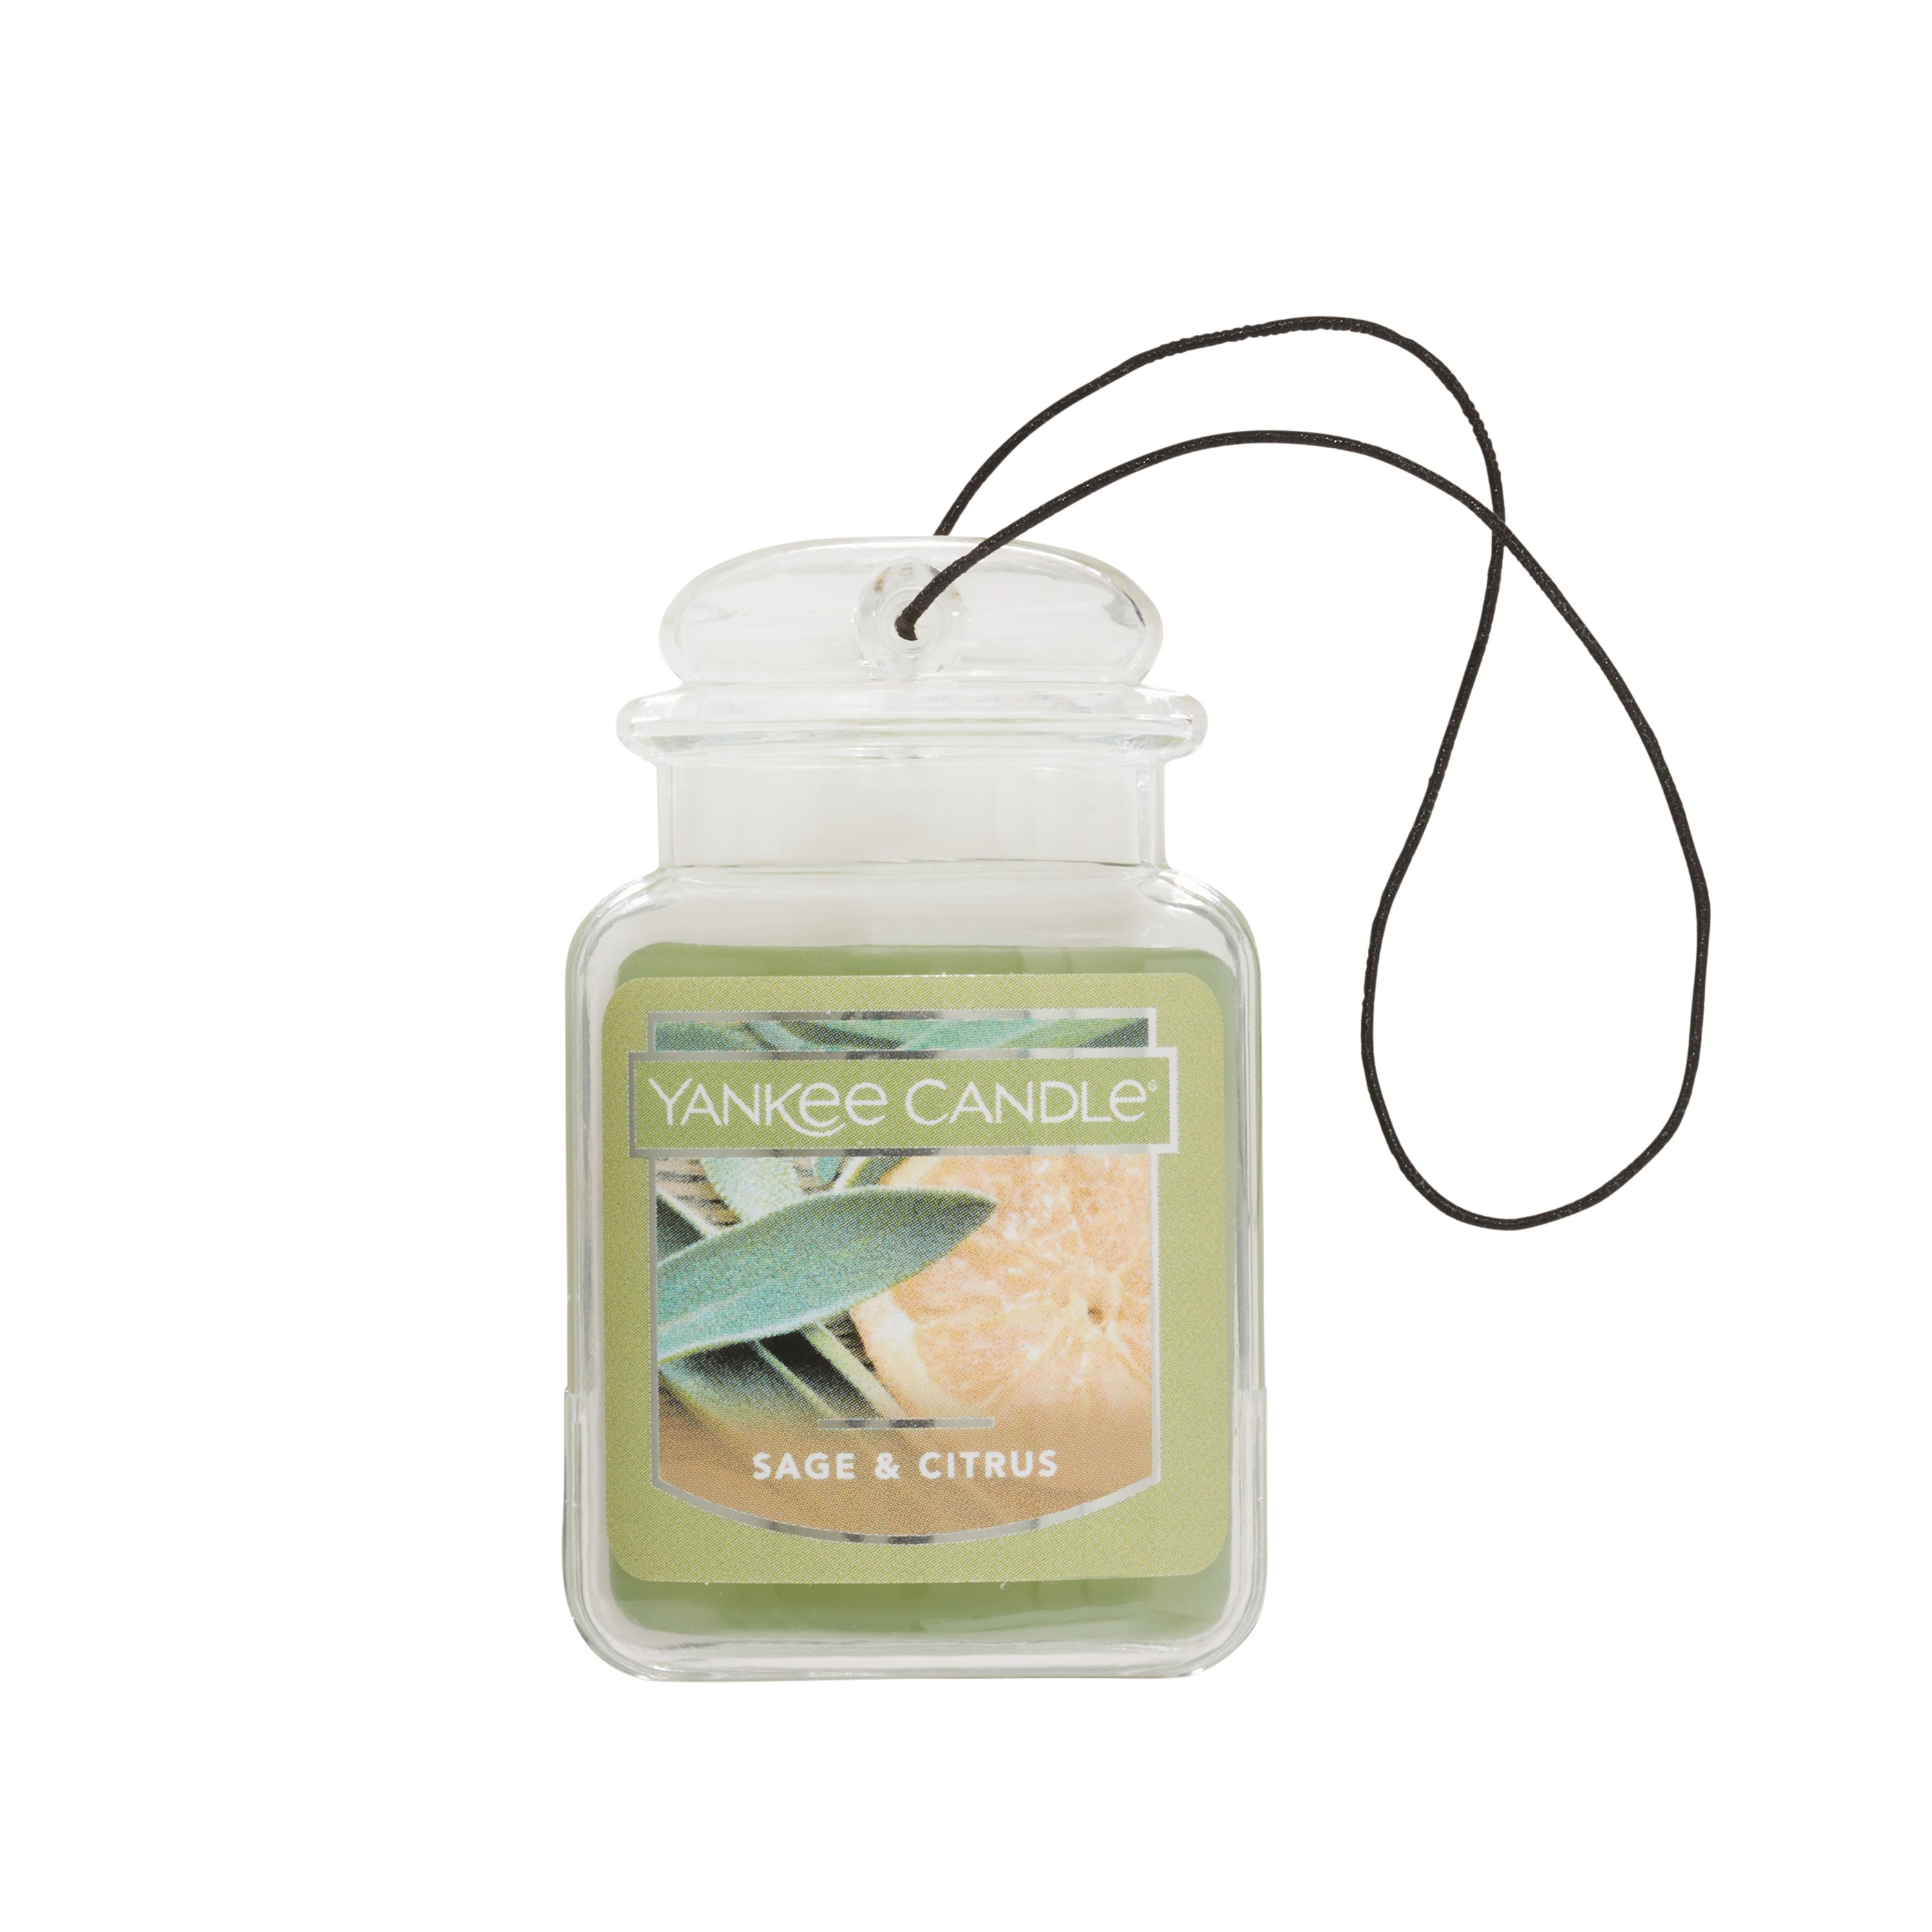 Yankee Candle® 3-Wick Sage & Citrus Jar Candle, 1 ct - Jay C Food Stores